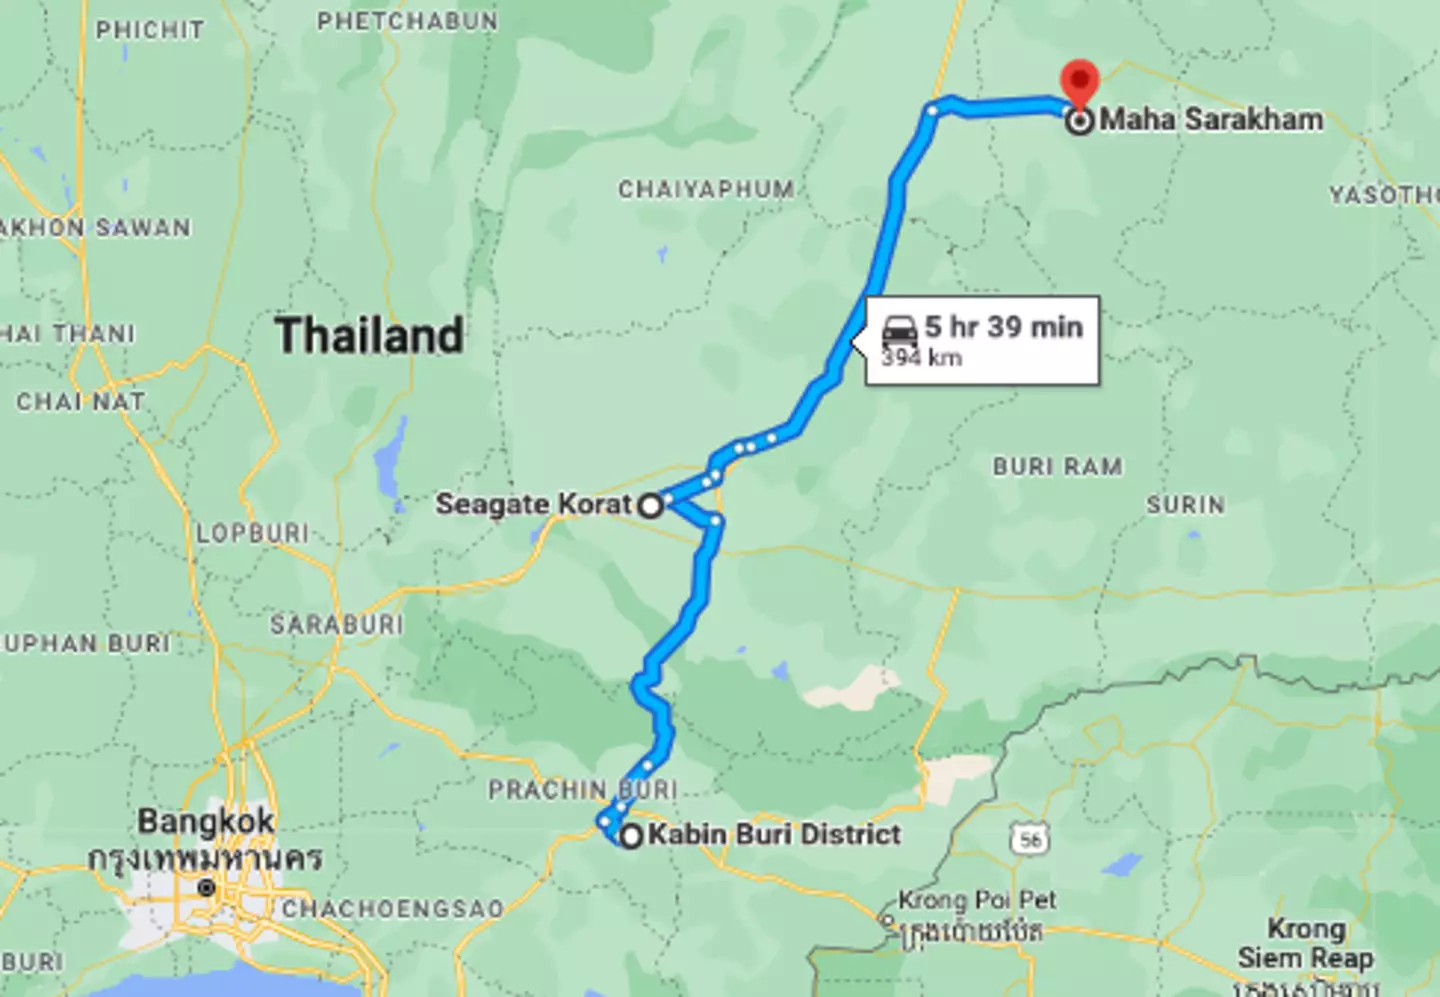 The province of Kubin Buri, where he drove to, and their final destination.